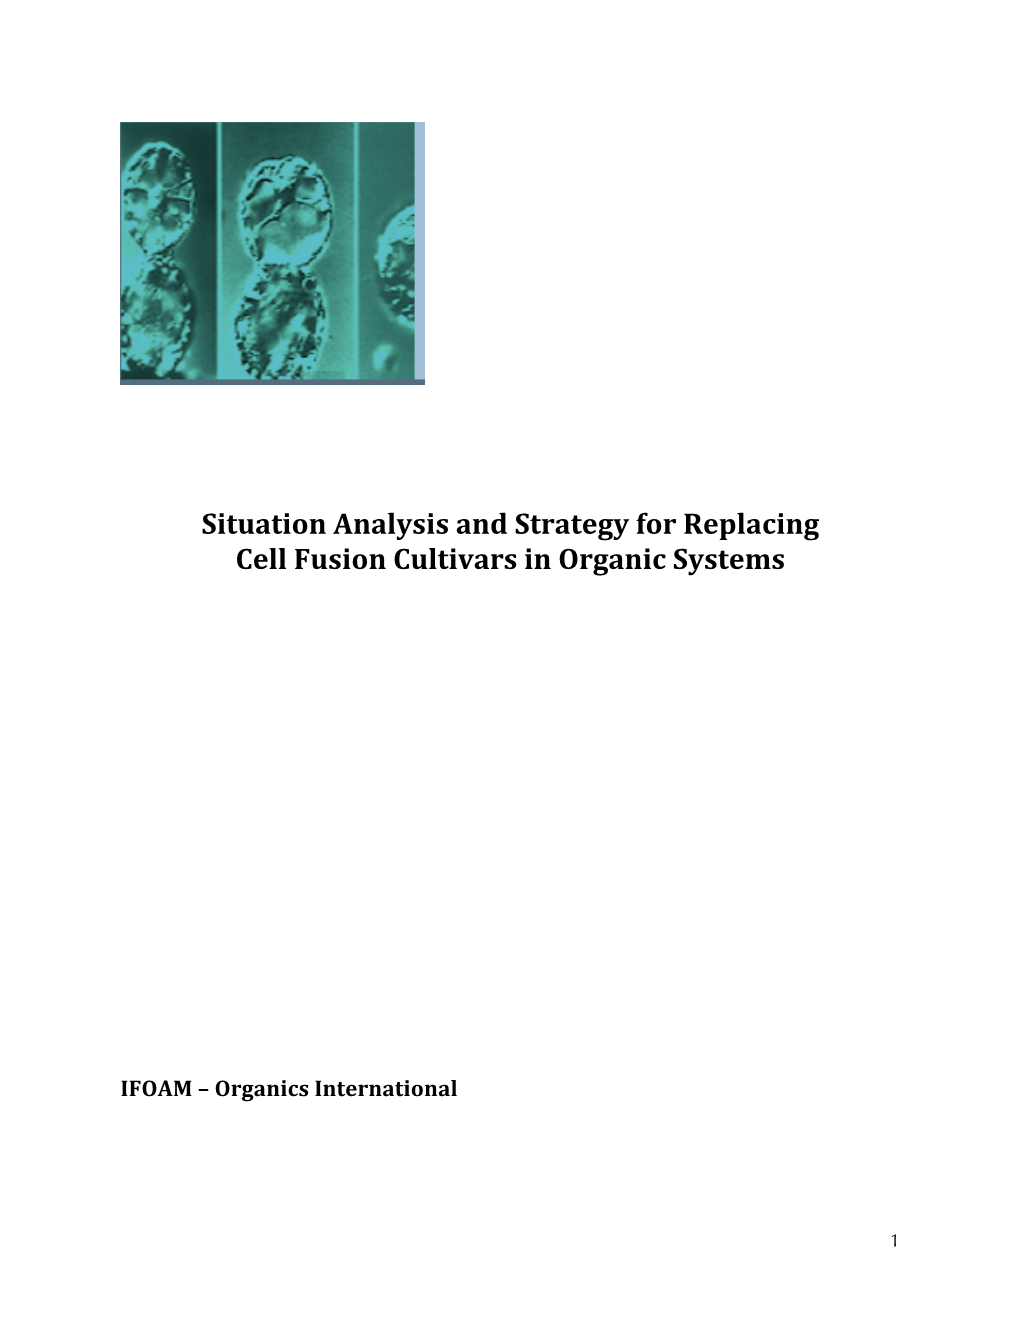 Situation Analysis and Strategy for Replacing Cell Fusion Cultivars in Organic Systems